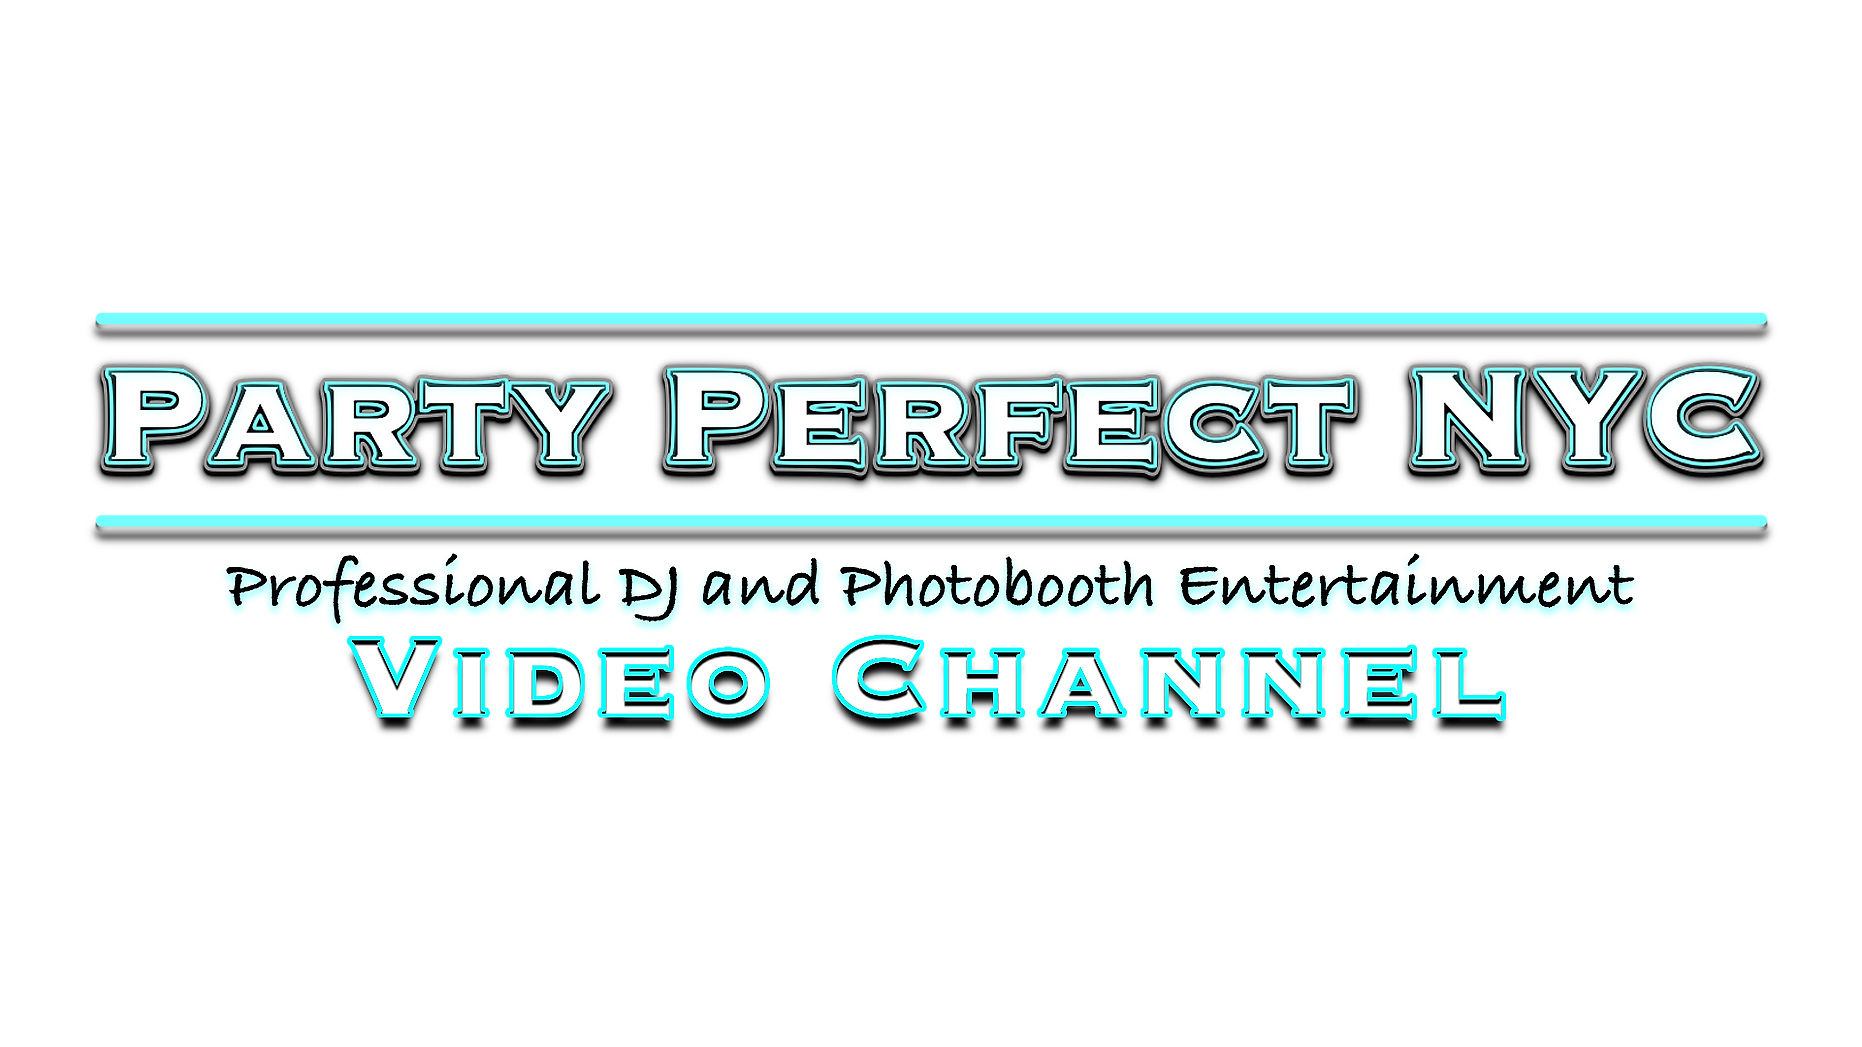 Party Perfect NYC Video Channel